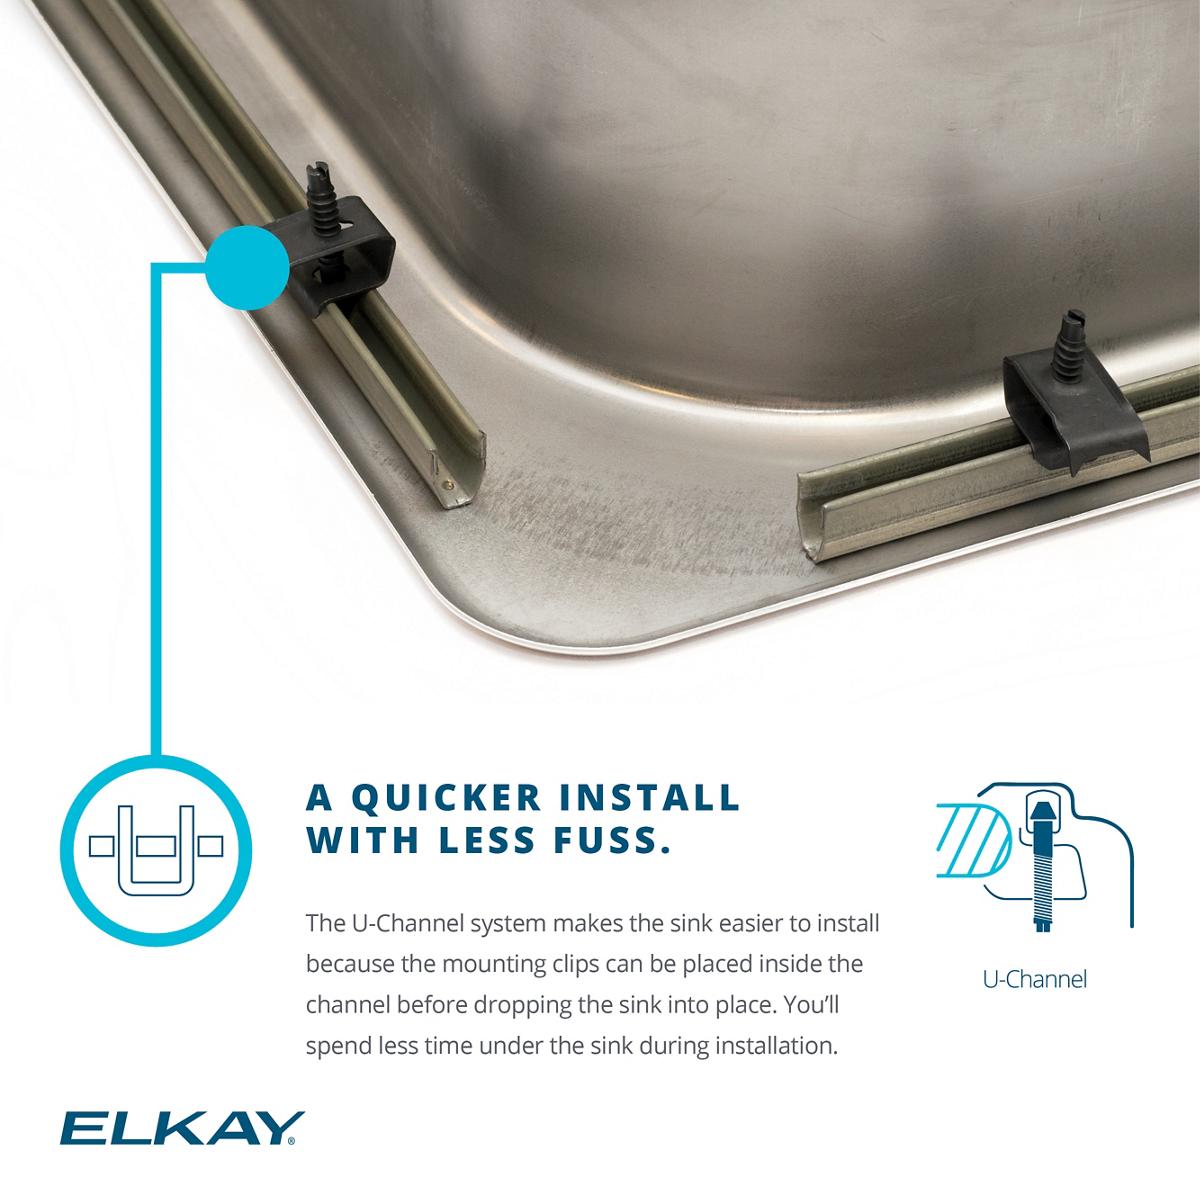 Elkay Lustertone Classic Stainless Steel 15" x 15" x 7-1/8" Single Bowl Drop-in Bar Sink and Faucet Kit